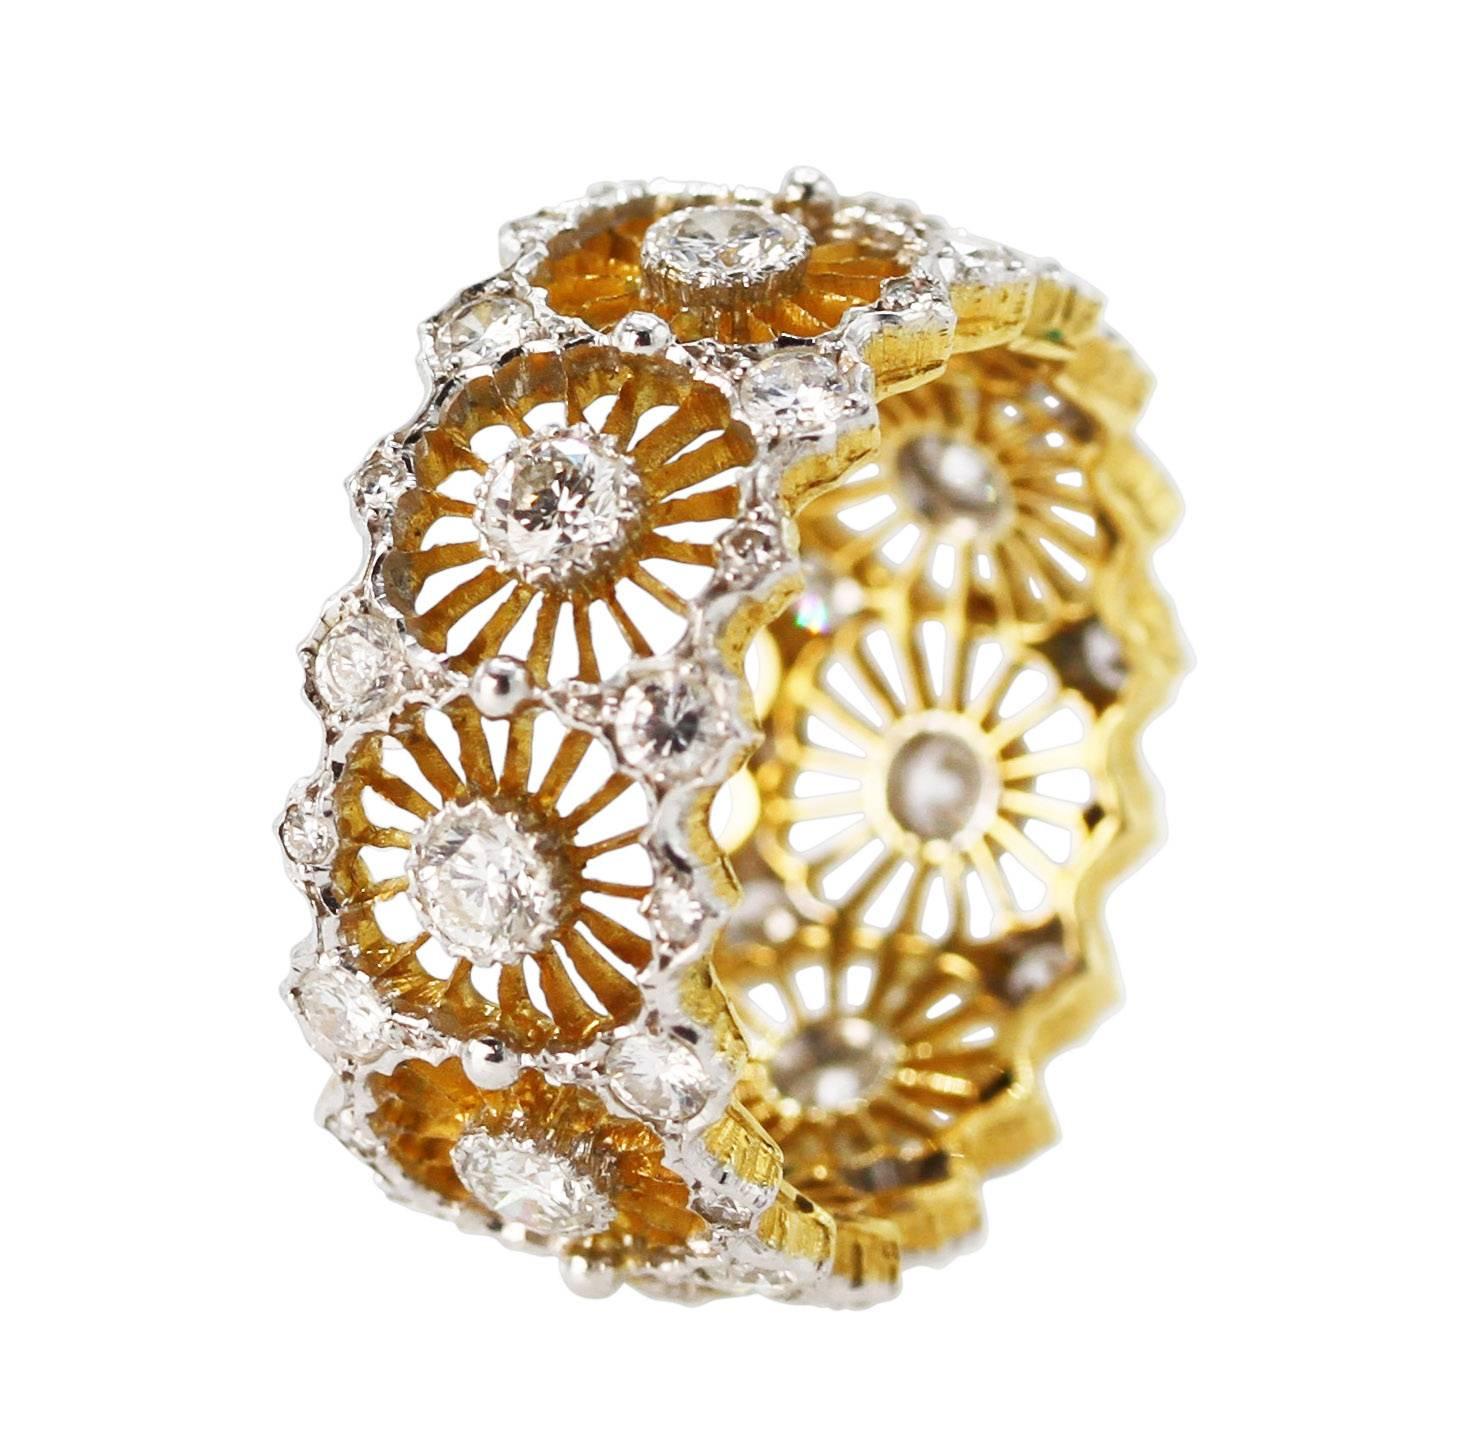 18 Karat Two-Tone Gold and Diamond Band Ring by Buccellati, Italy
• Signed Buccellati, Italy
• 45 round diamonds approximately 1.70 carats
• Size 7, gross weight 5.8 grams                                                        